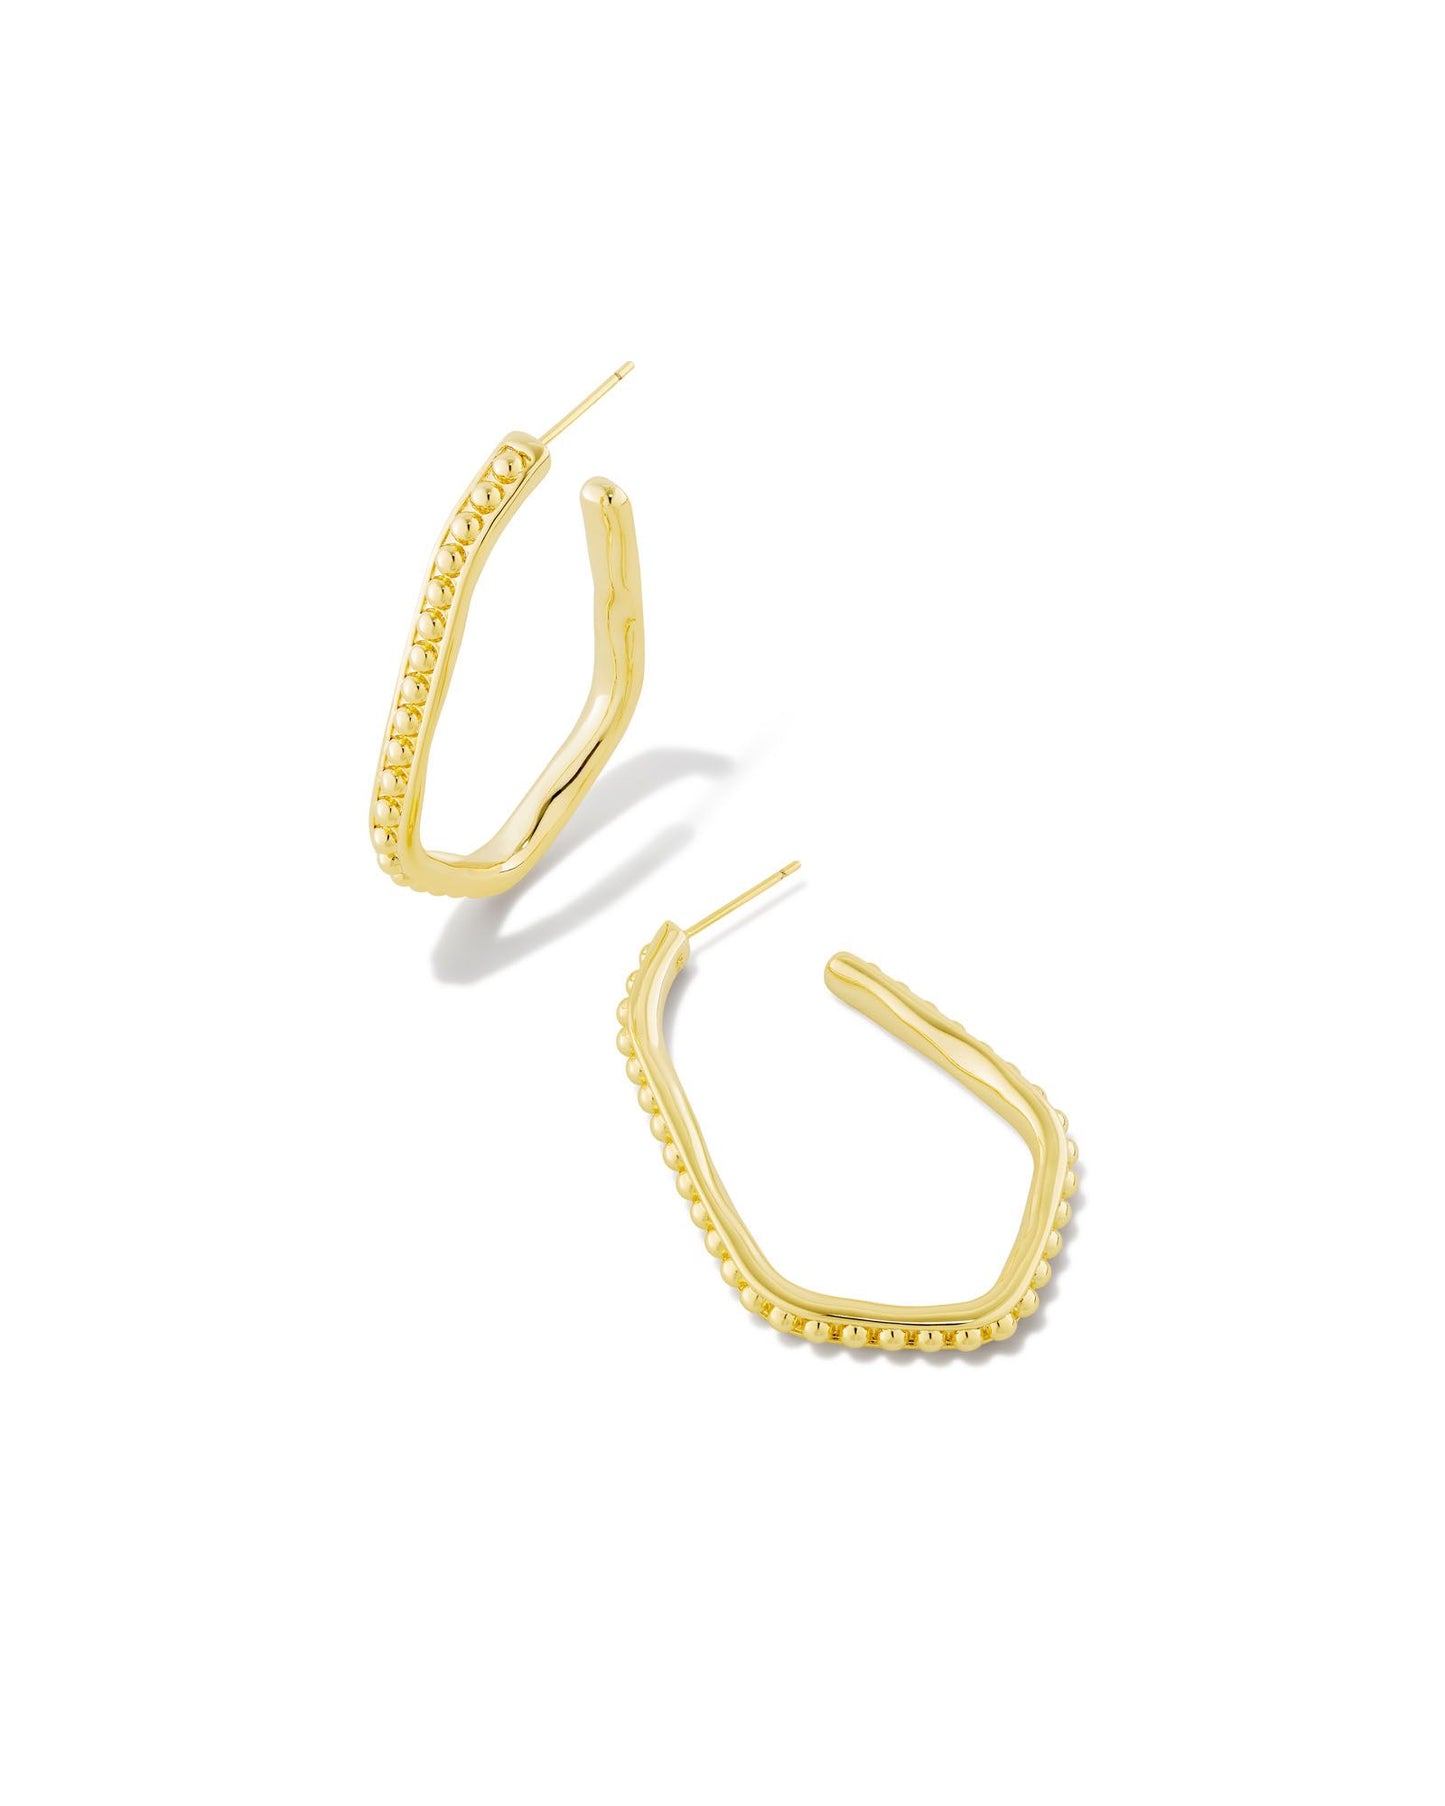 This eye-catching elongated hoop design is perfect for shaking up your look. With textured metal beads and a face-framing shape, the Lonnie Beaded Hoop Earrings in Gold go with any sense of style. These are Gold Color